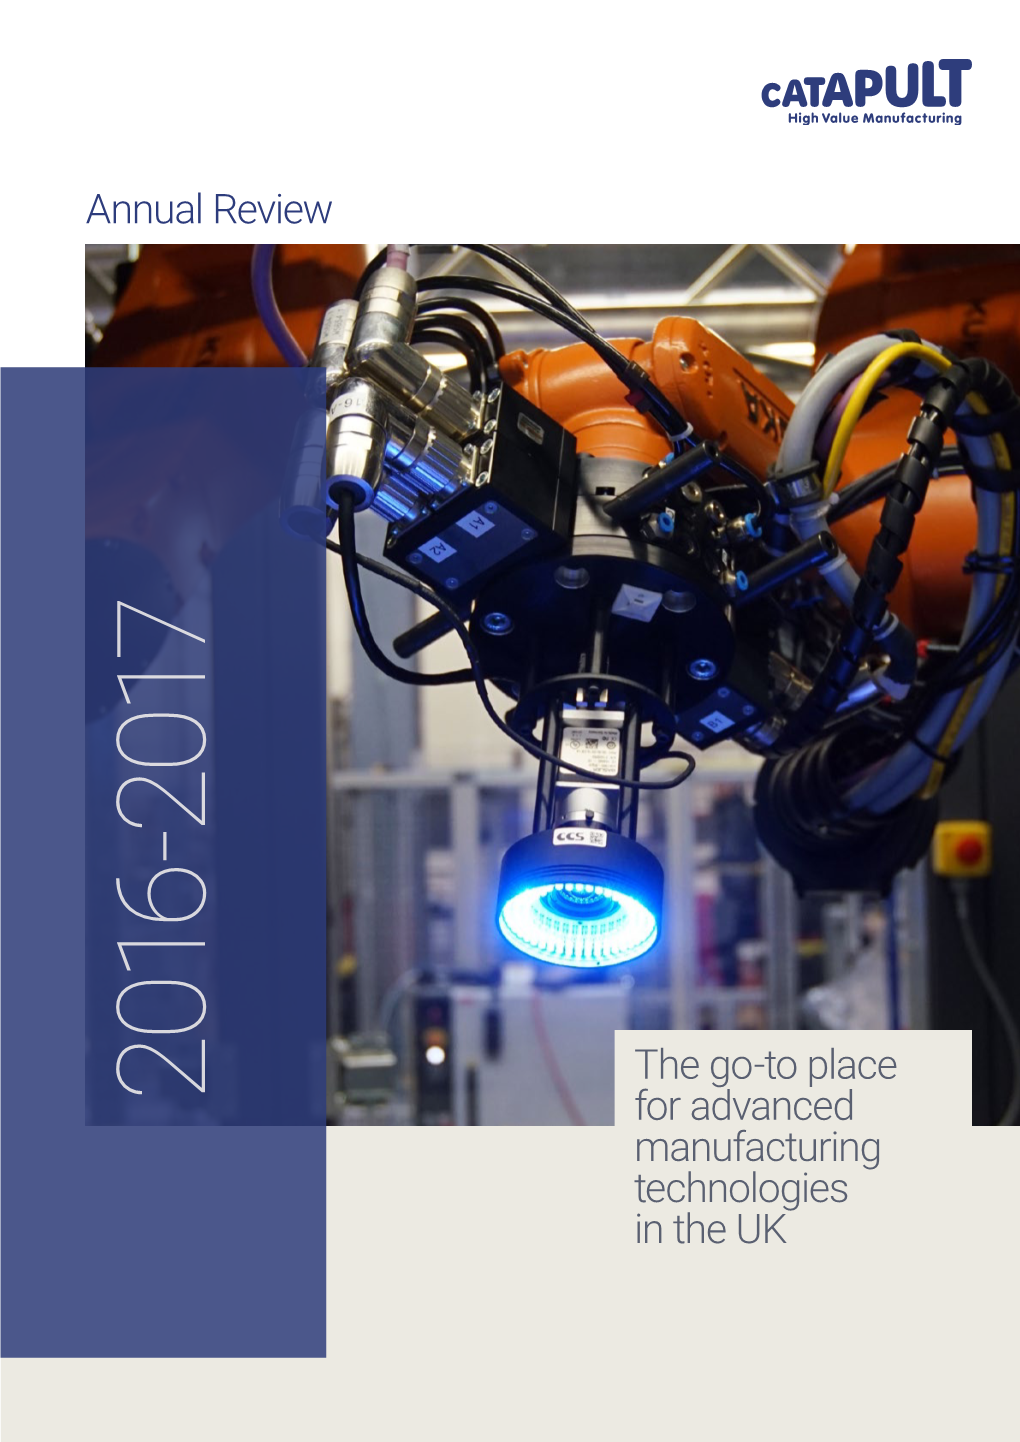 The Go-To Place for Advanced Manufacturing Technologies in the UK Annual Review